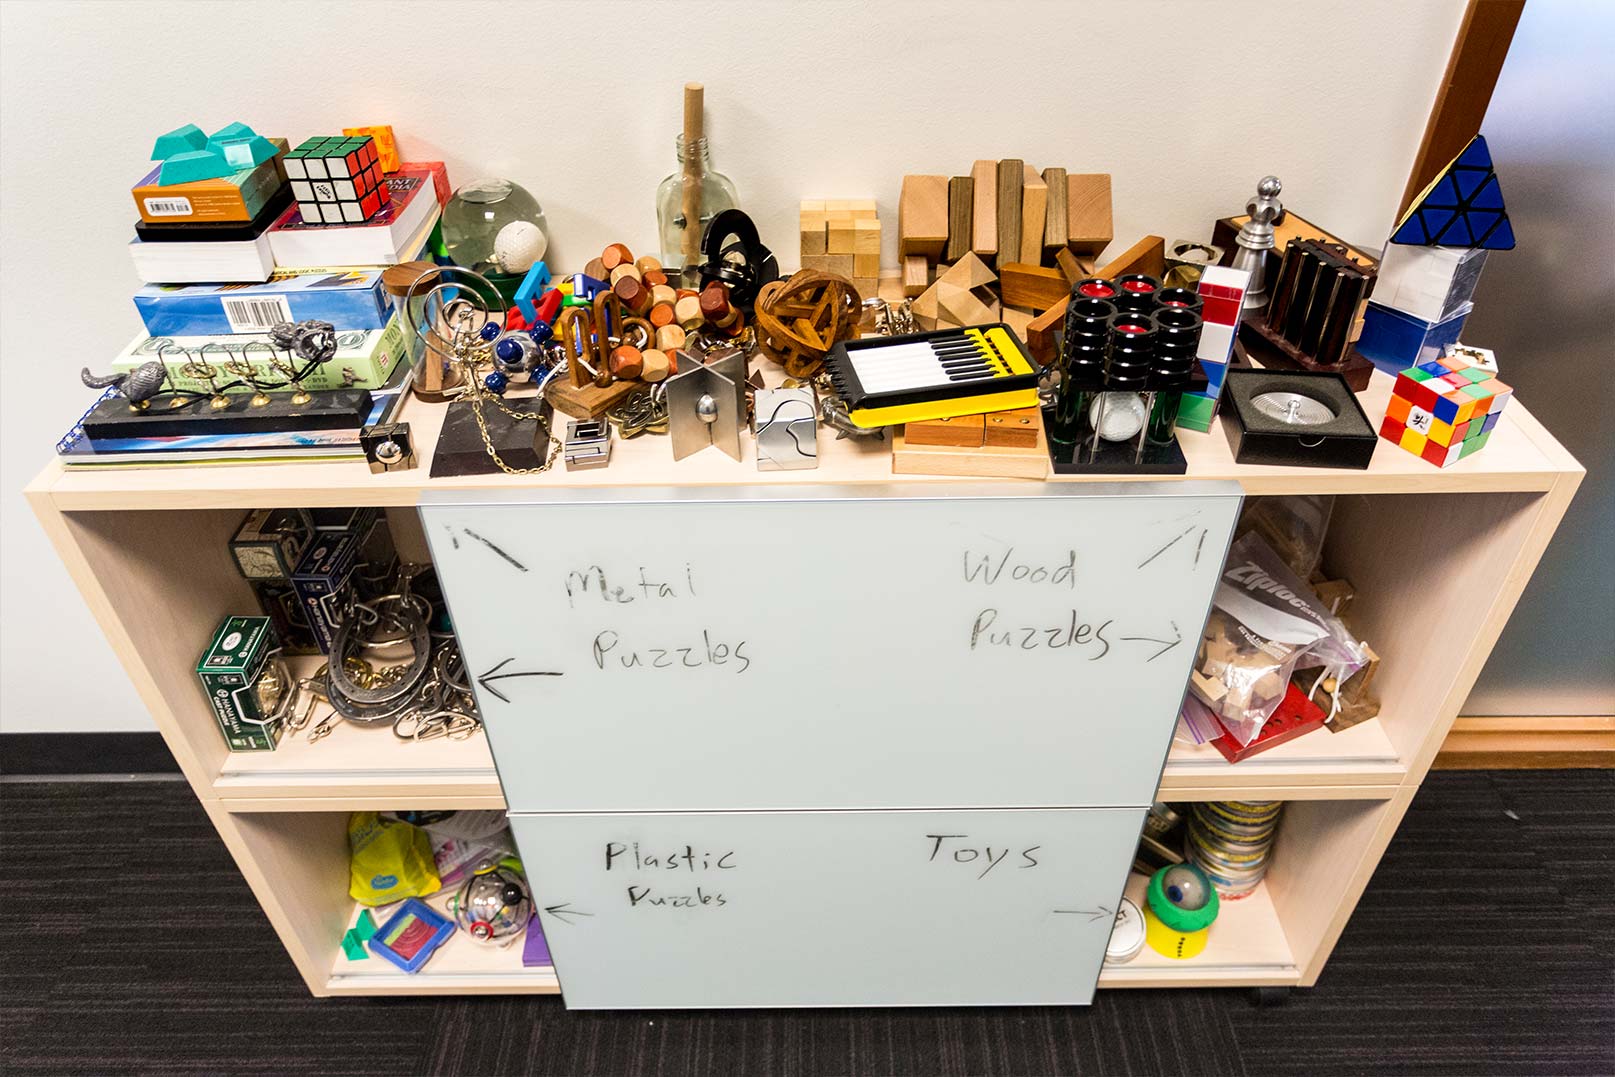 A shelf full of wooden puzzles sits outside Zach Johnson’s office door.